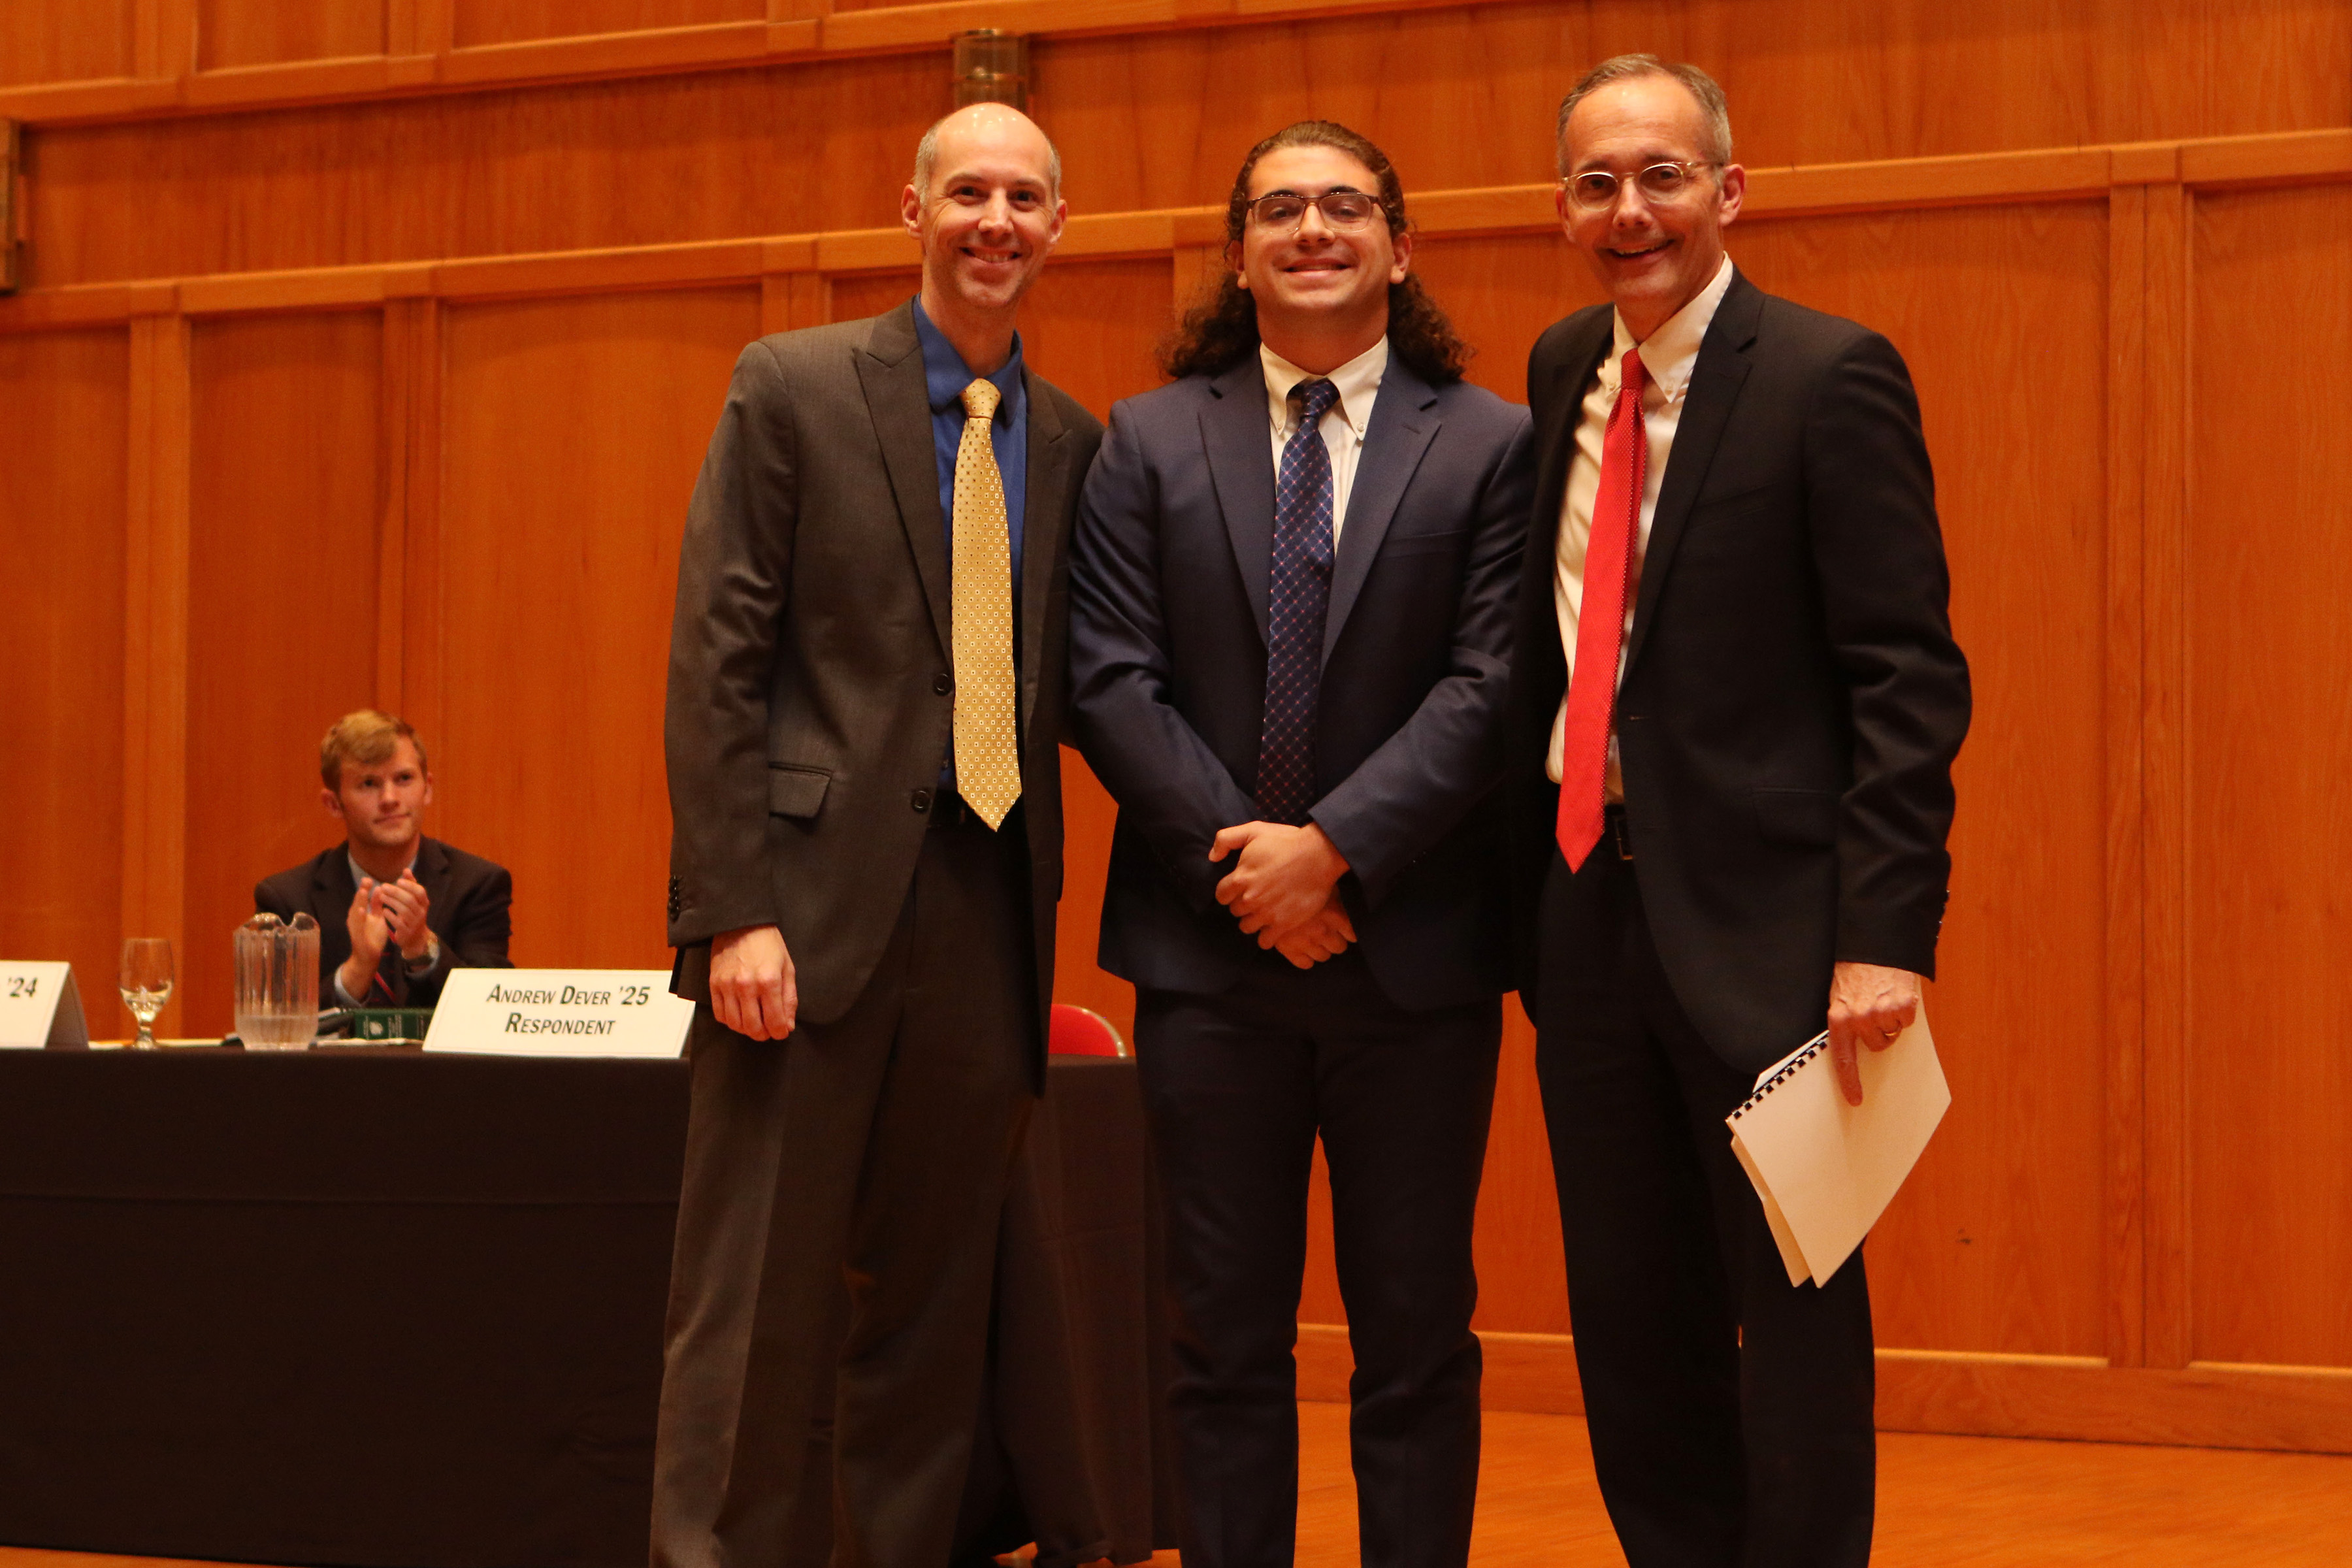 Andrew Dever ’25 (center) was named the recipient of the Floyd Artful Advocacy Prize.